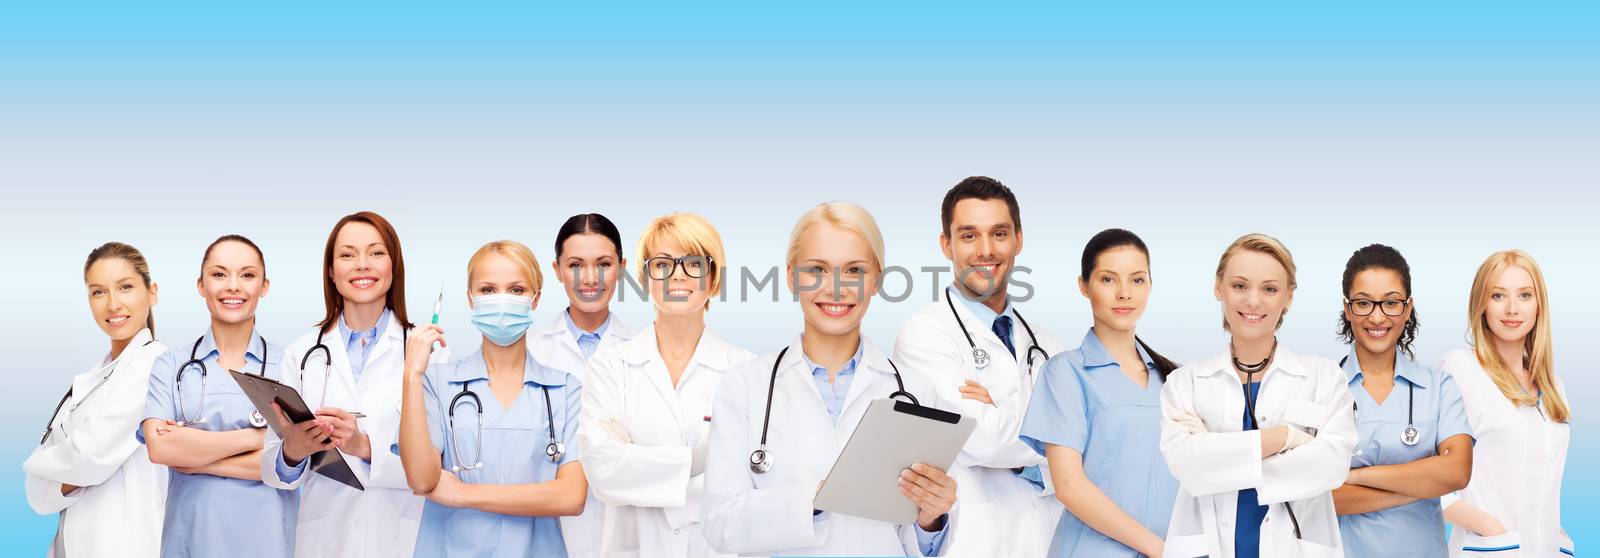 healthcare, technology and medicine concept - smiling female doctors and nurses with tablet pc computer